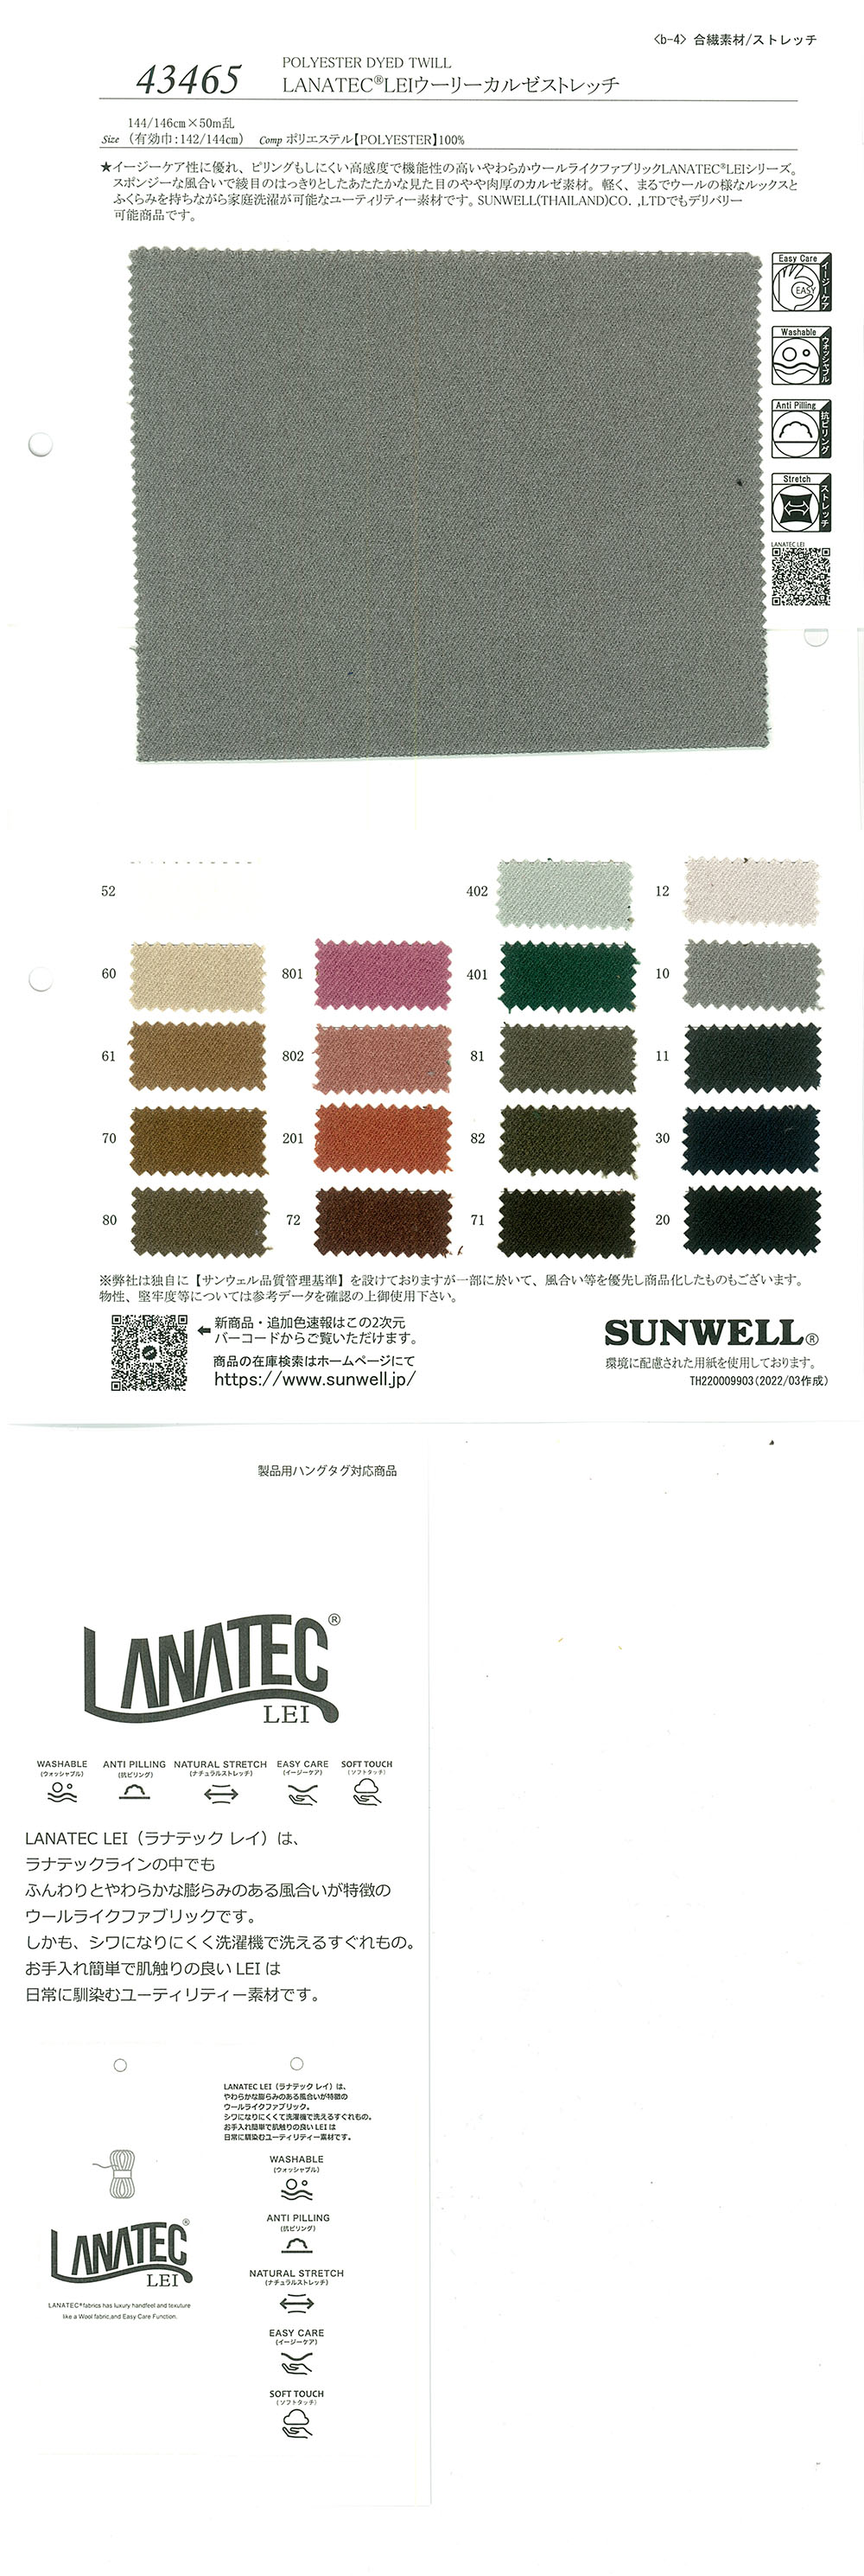 43465 LANATEC(R) LEI Woolly Kersey Stretch[Textile / Fabric] SUNWELL